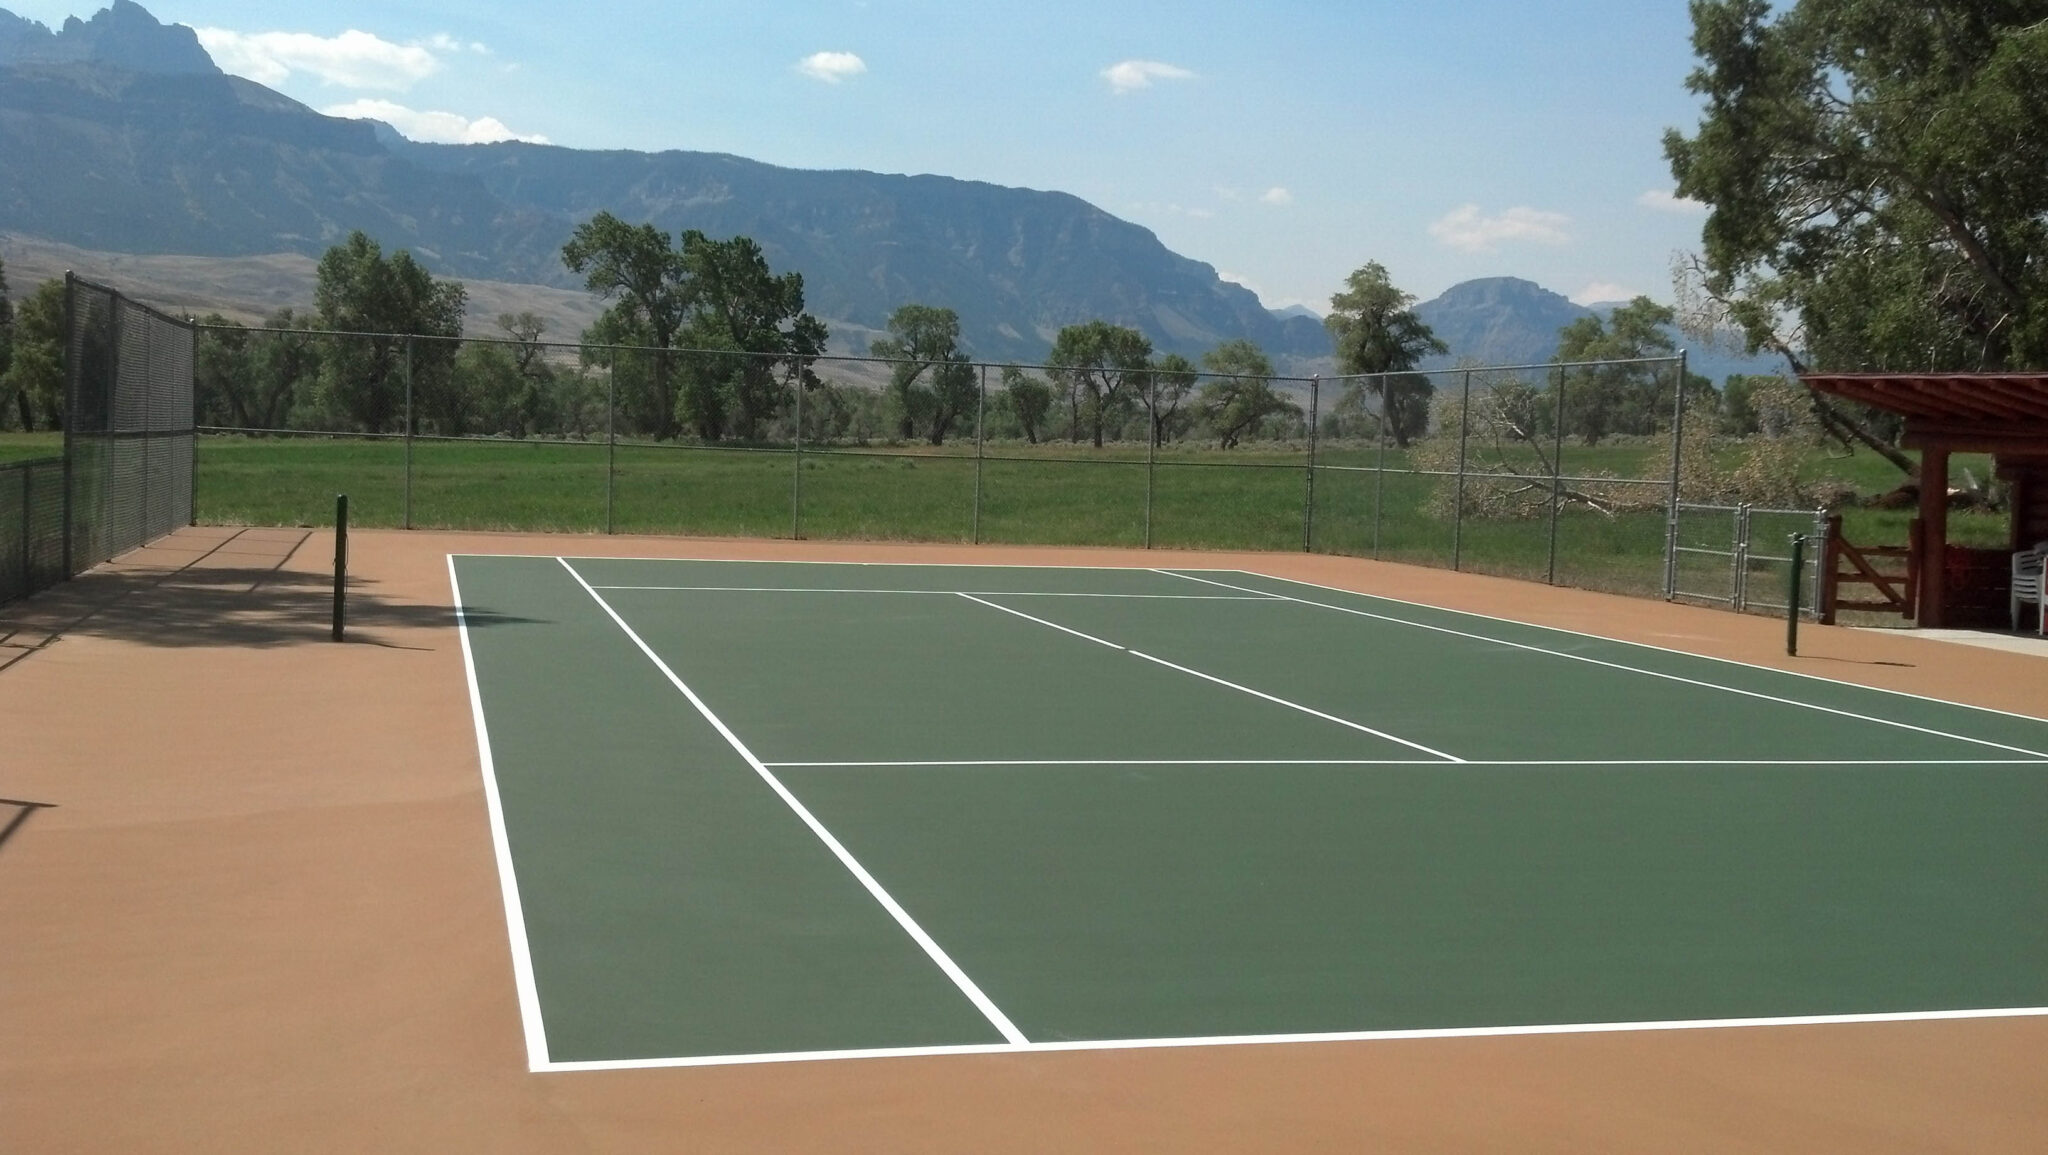 A new tennis court with big mountains in the background a green, white, and tan color scheme.